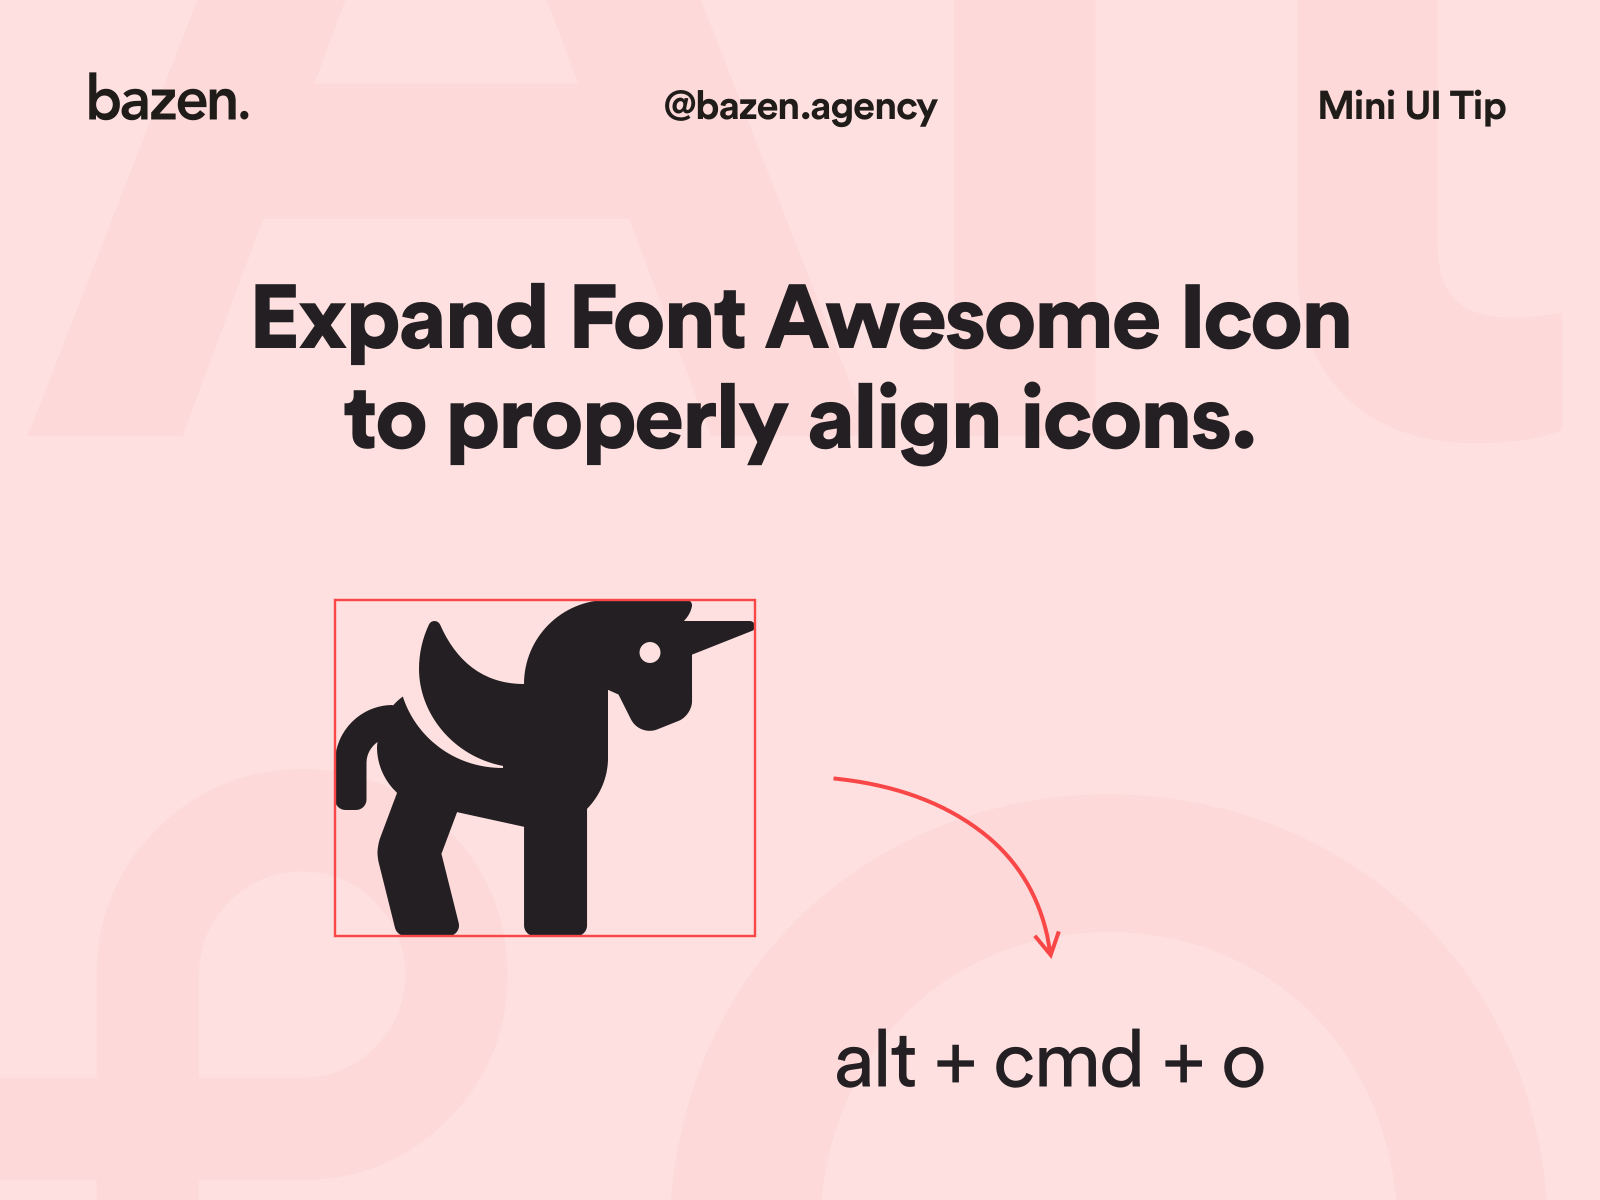 Mini UI Tip - How to align Font Awesome shortcuts shortcut sketchapp font family bazen agency design agency ux design ui design ux ui design tip design tips align alignment icon font font design icon design icons design icons font awesome